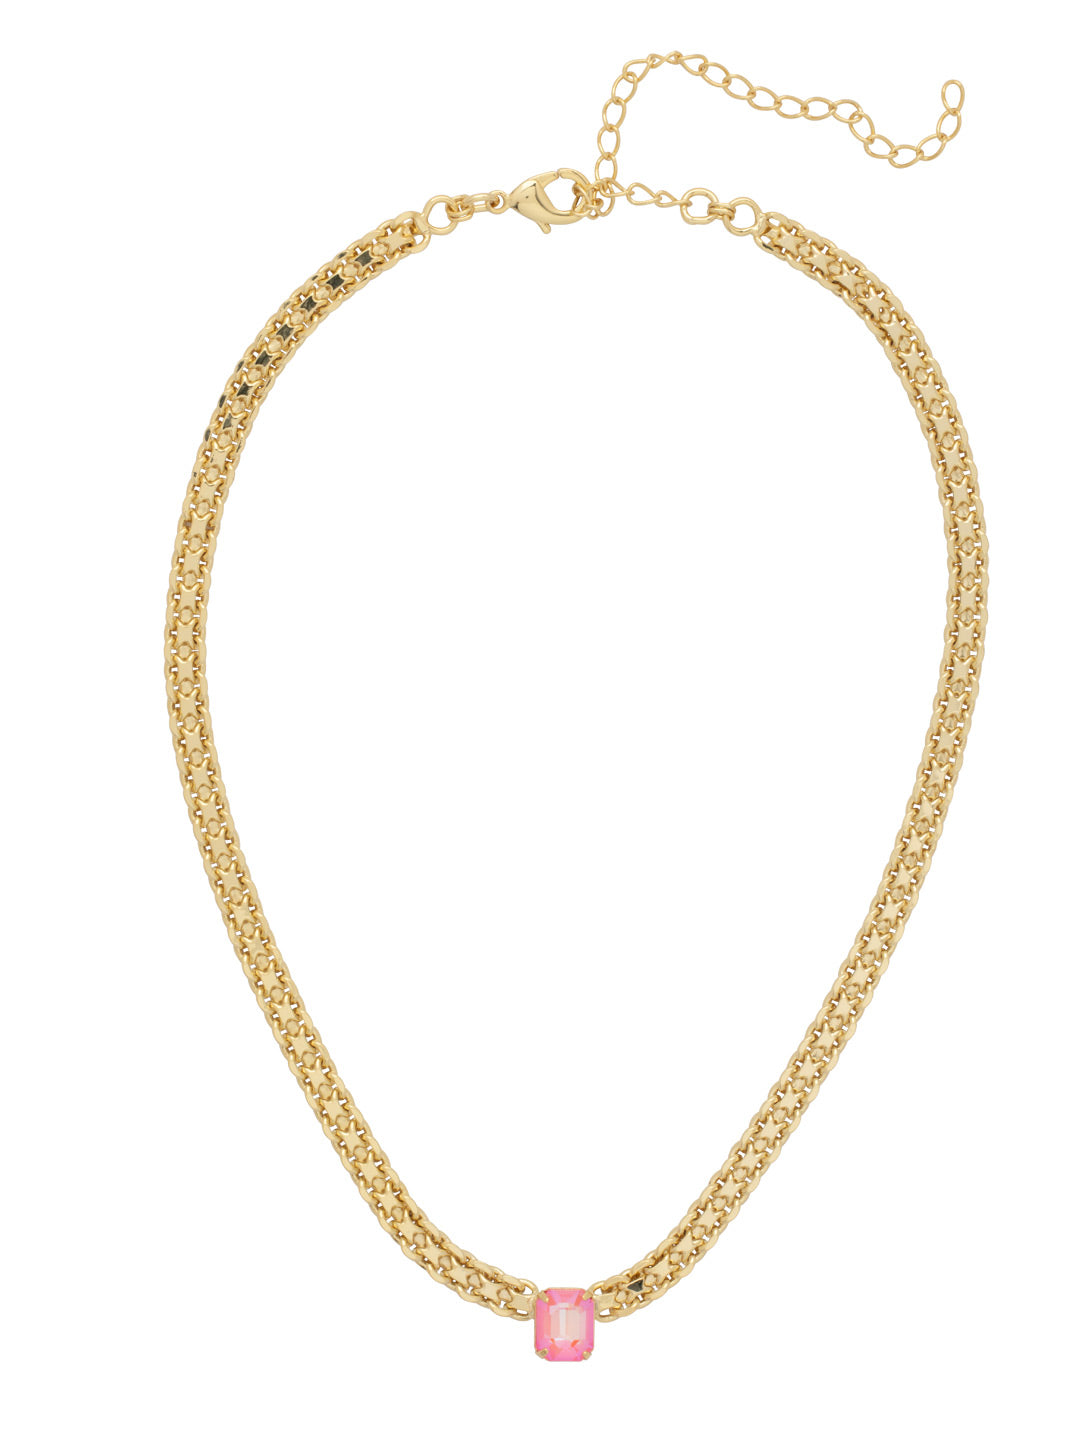 Octavia Tennis Necklace - NFK6BGBFL - <p>The Octavia Tennis Necklace features a single petite emerald cut crystal on an adjustable chain, secured with a lobster claw clasp. From Sorrelli's Big Flirt collection in our Bright Gold-tone finish.</p>